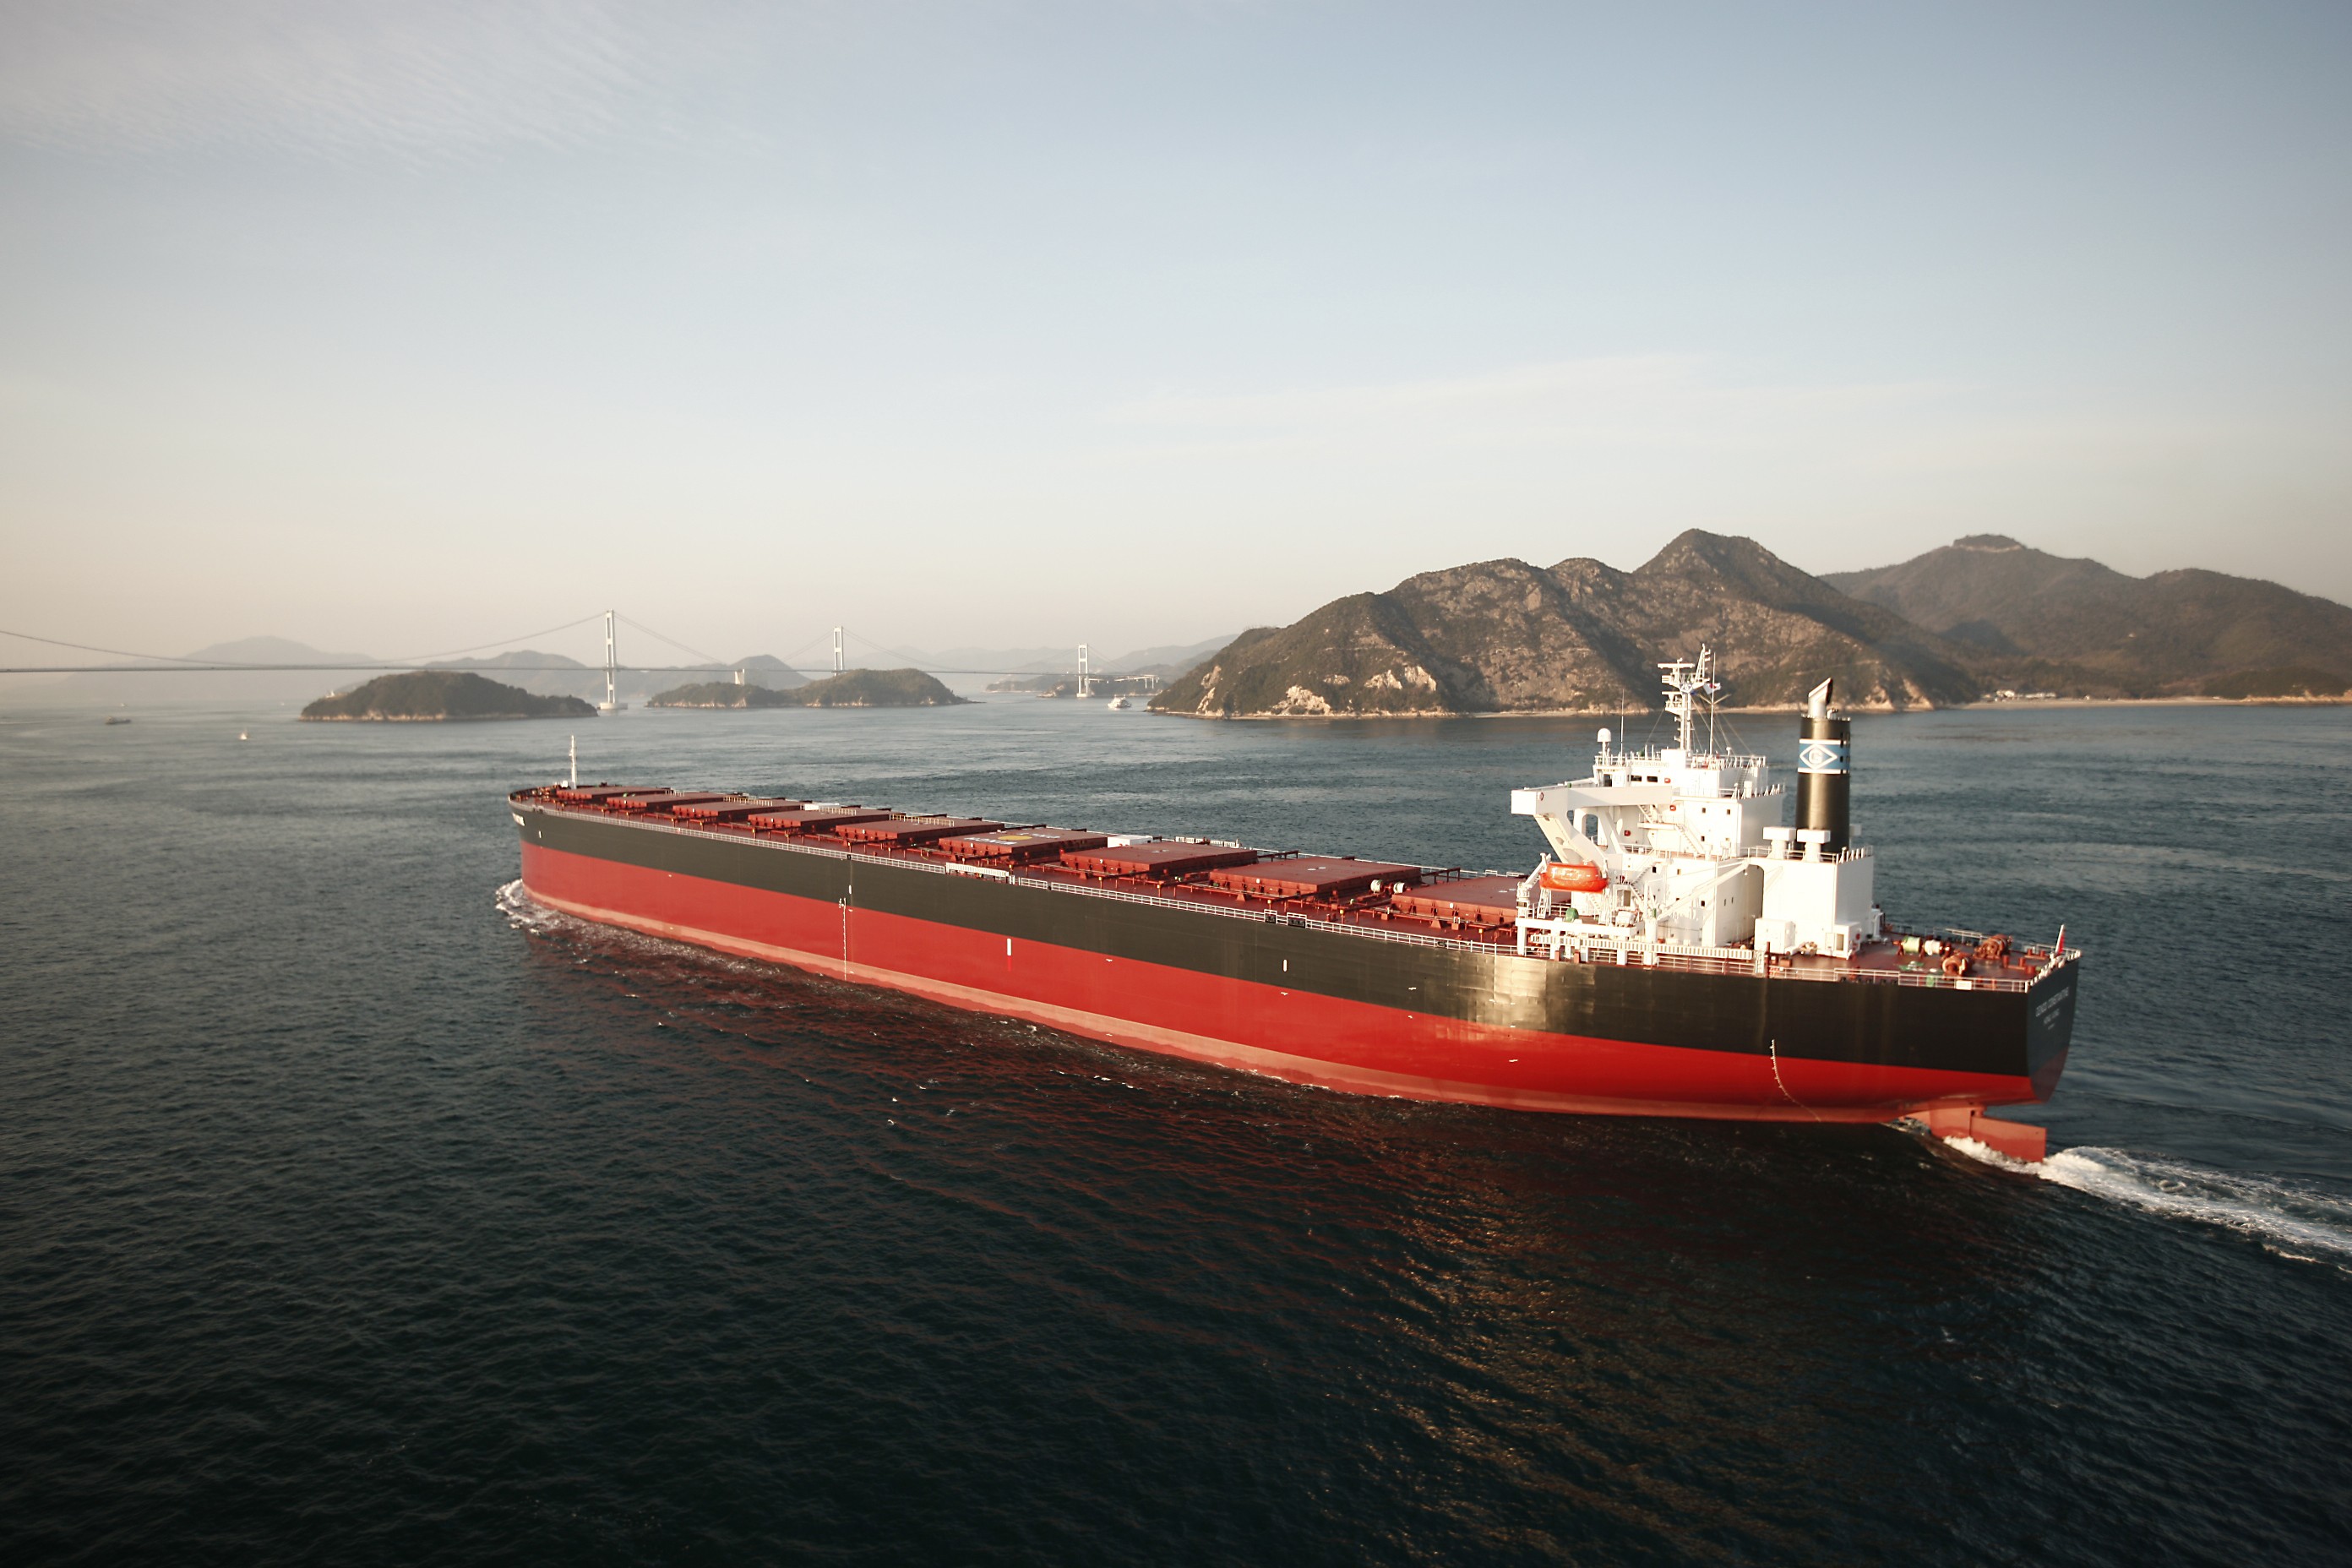 Genco Shipping & Trading Limited to Jointly Study Ammonia as an Alternative Marine Fuel